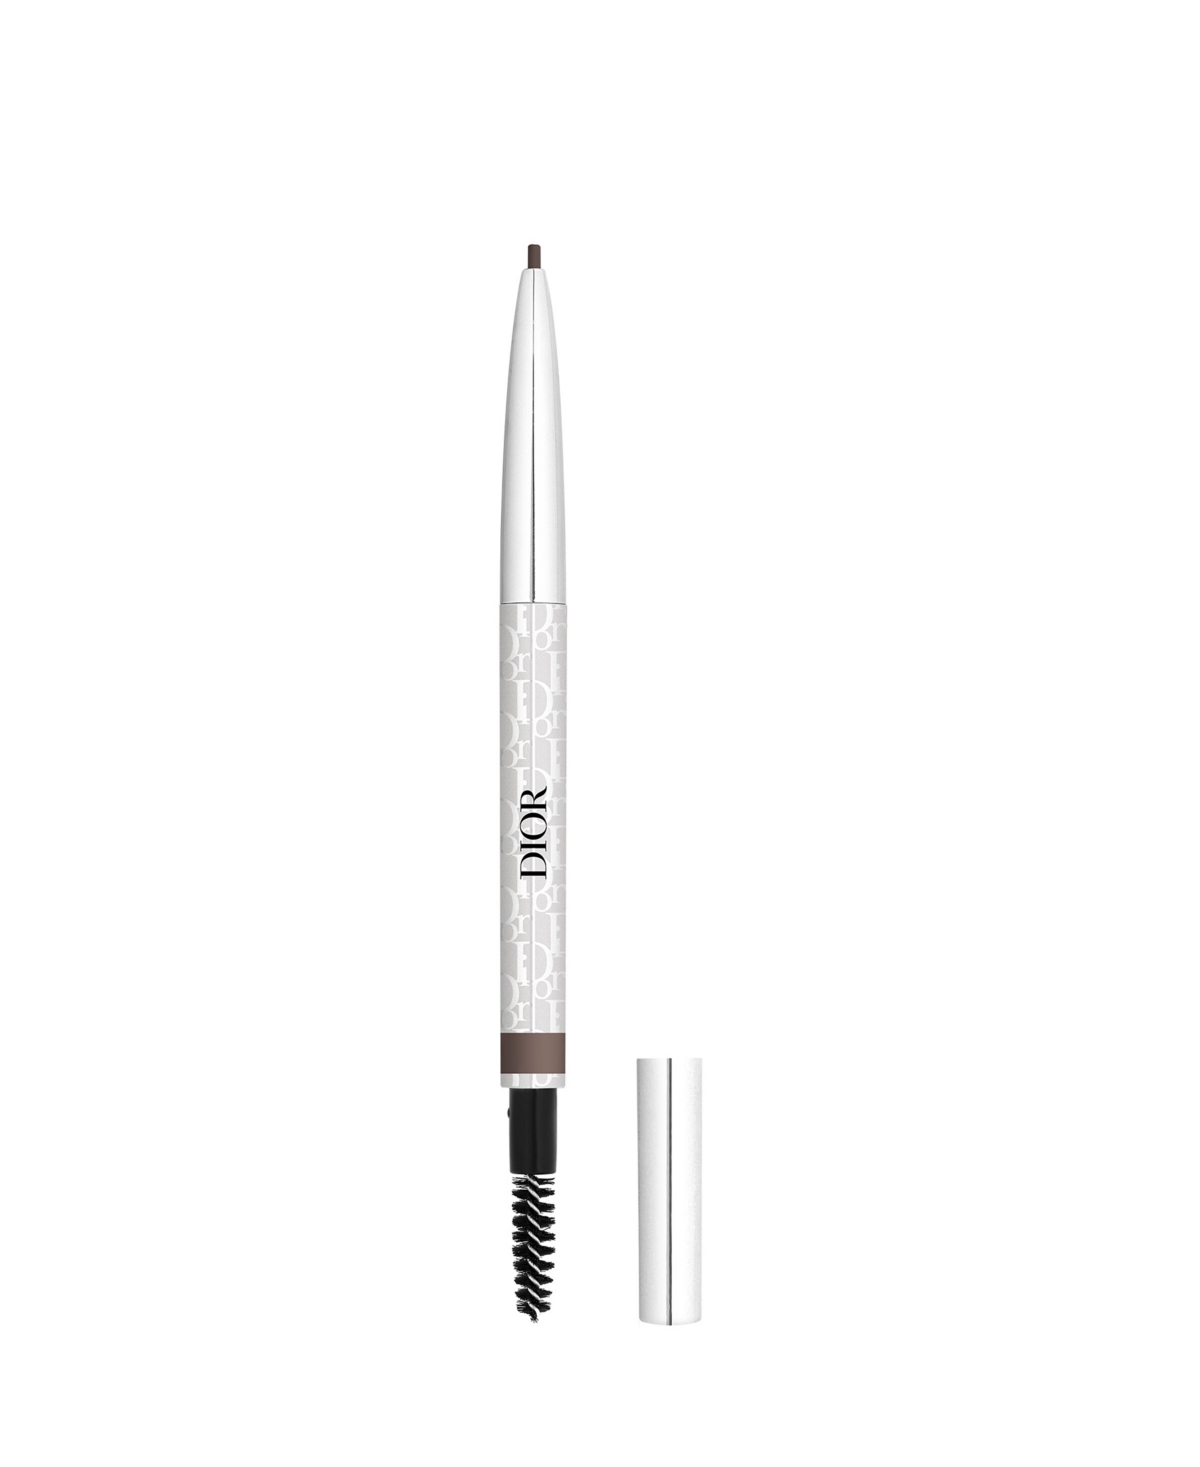 Dior Show Brow Styler Eyebrow Pencil In Brown